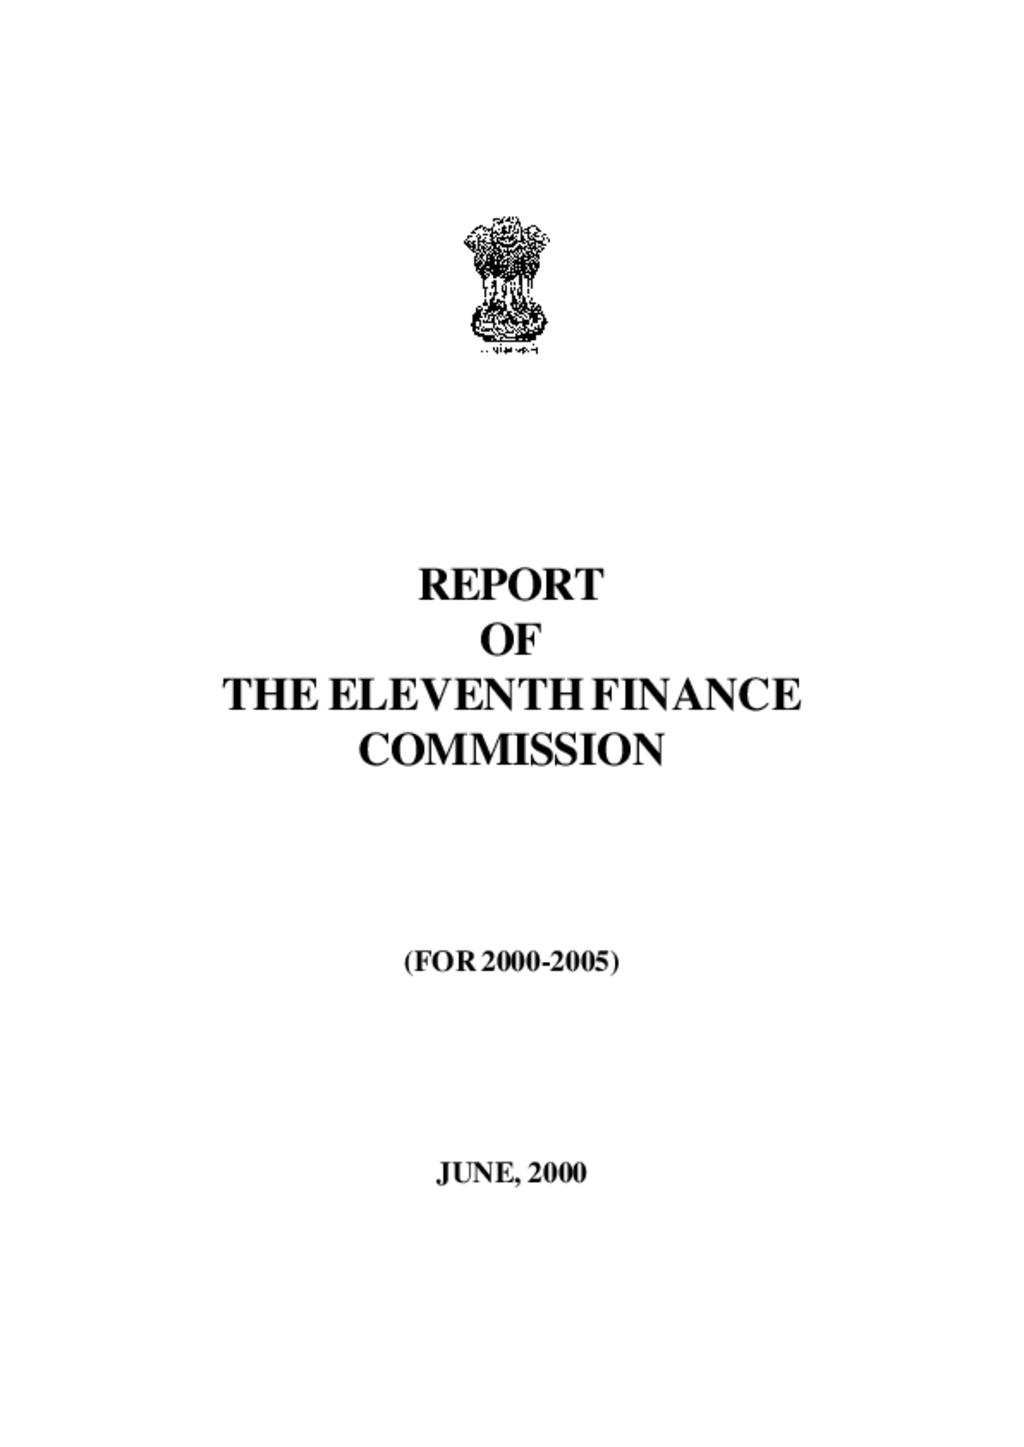 Report of The Eleventh Finance Commission (for 2000-2005)